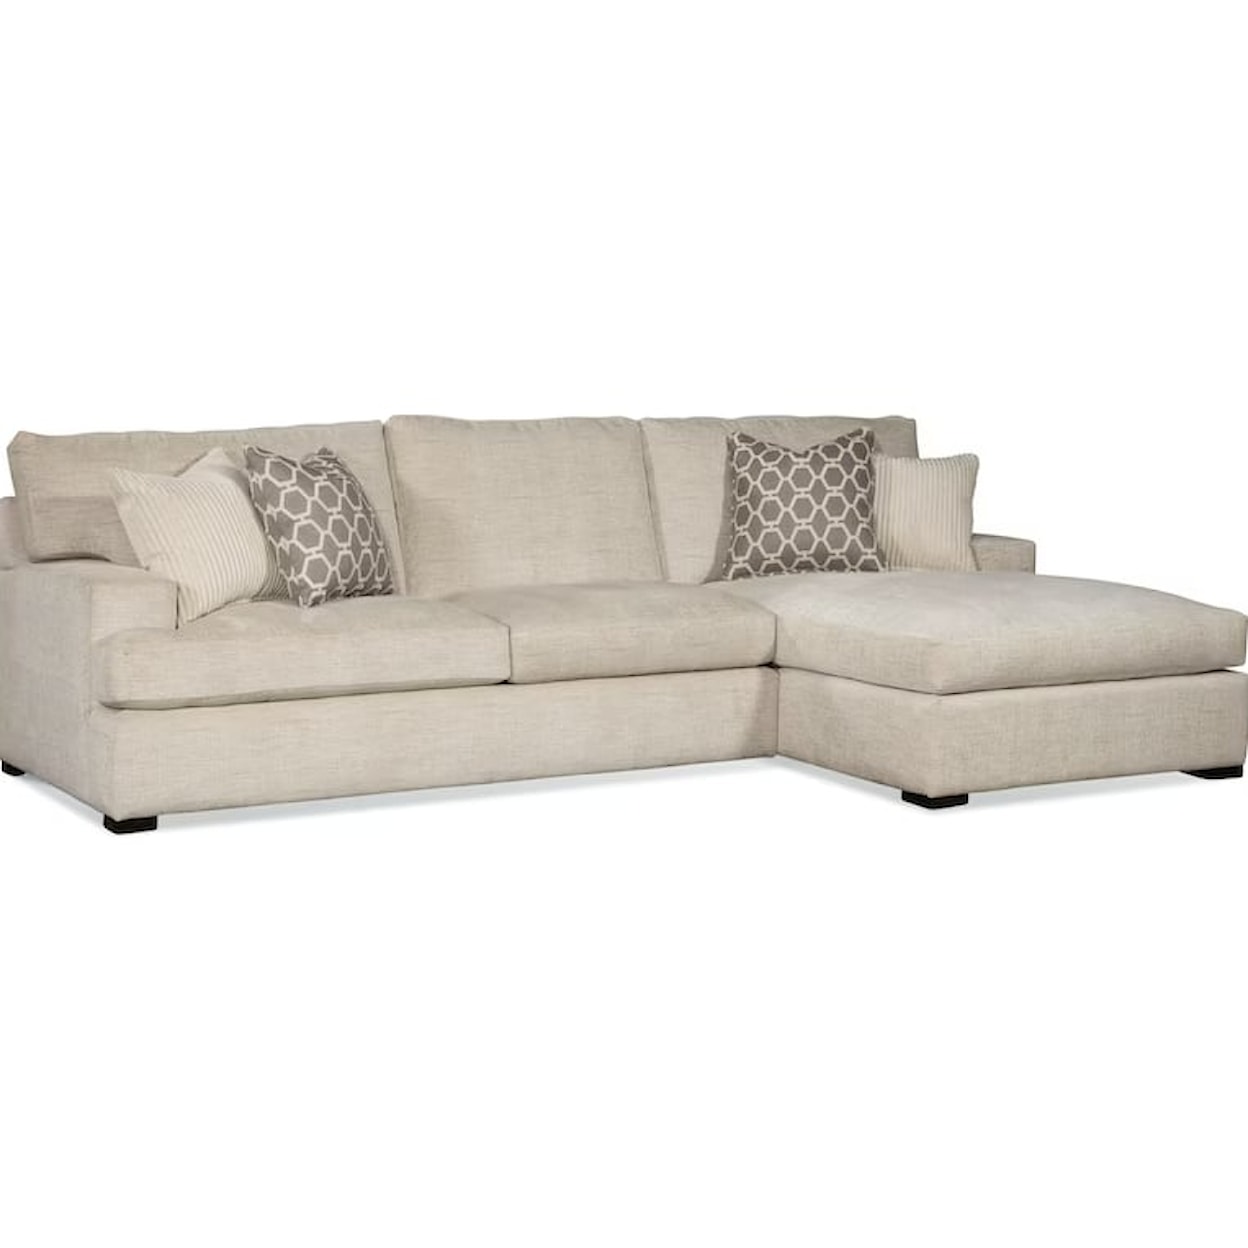 Braxton Culler Cambria 2-Piece Chaise Sectional